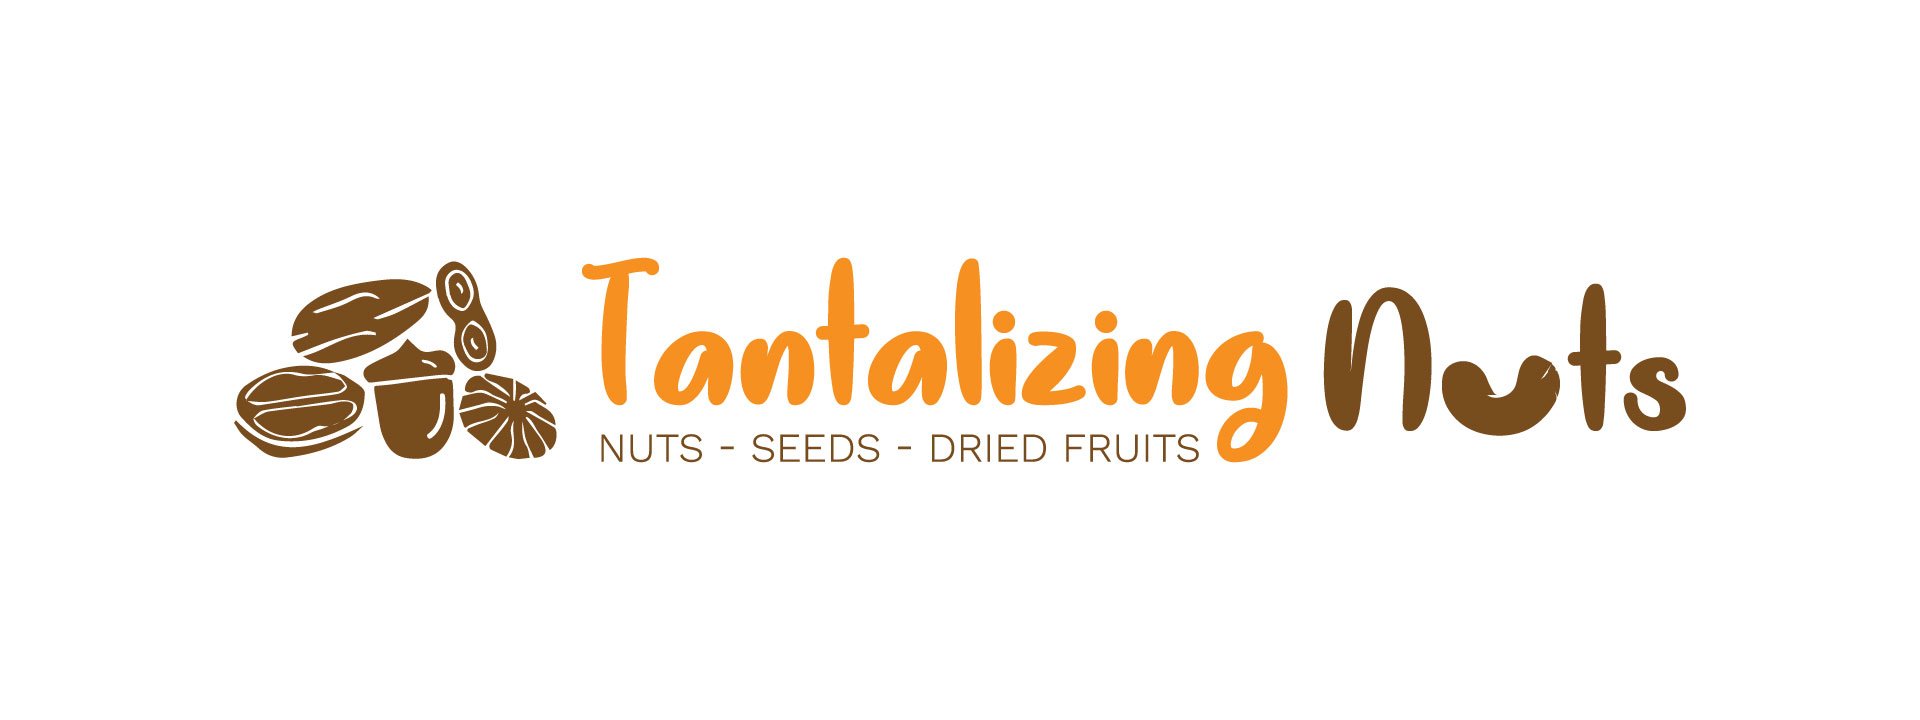 #TantalizingNuts is an online #Nuts, #DriedFruits, #Seeds and #Spices shop. Based in #Pune Tantalizing nuts sells #Premium #Quality products all over #India.